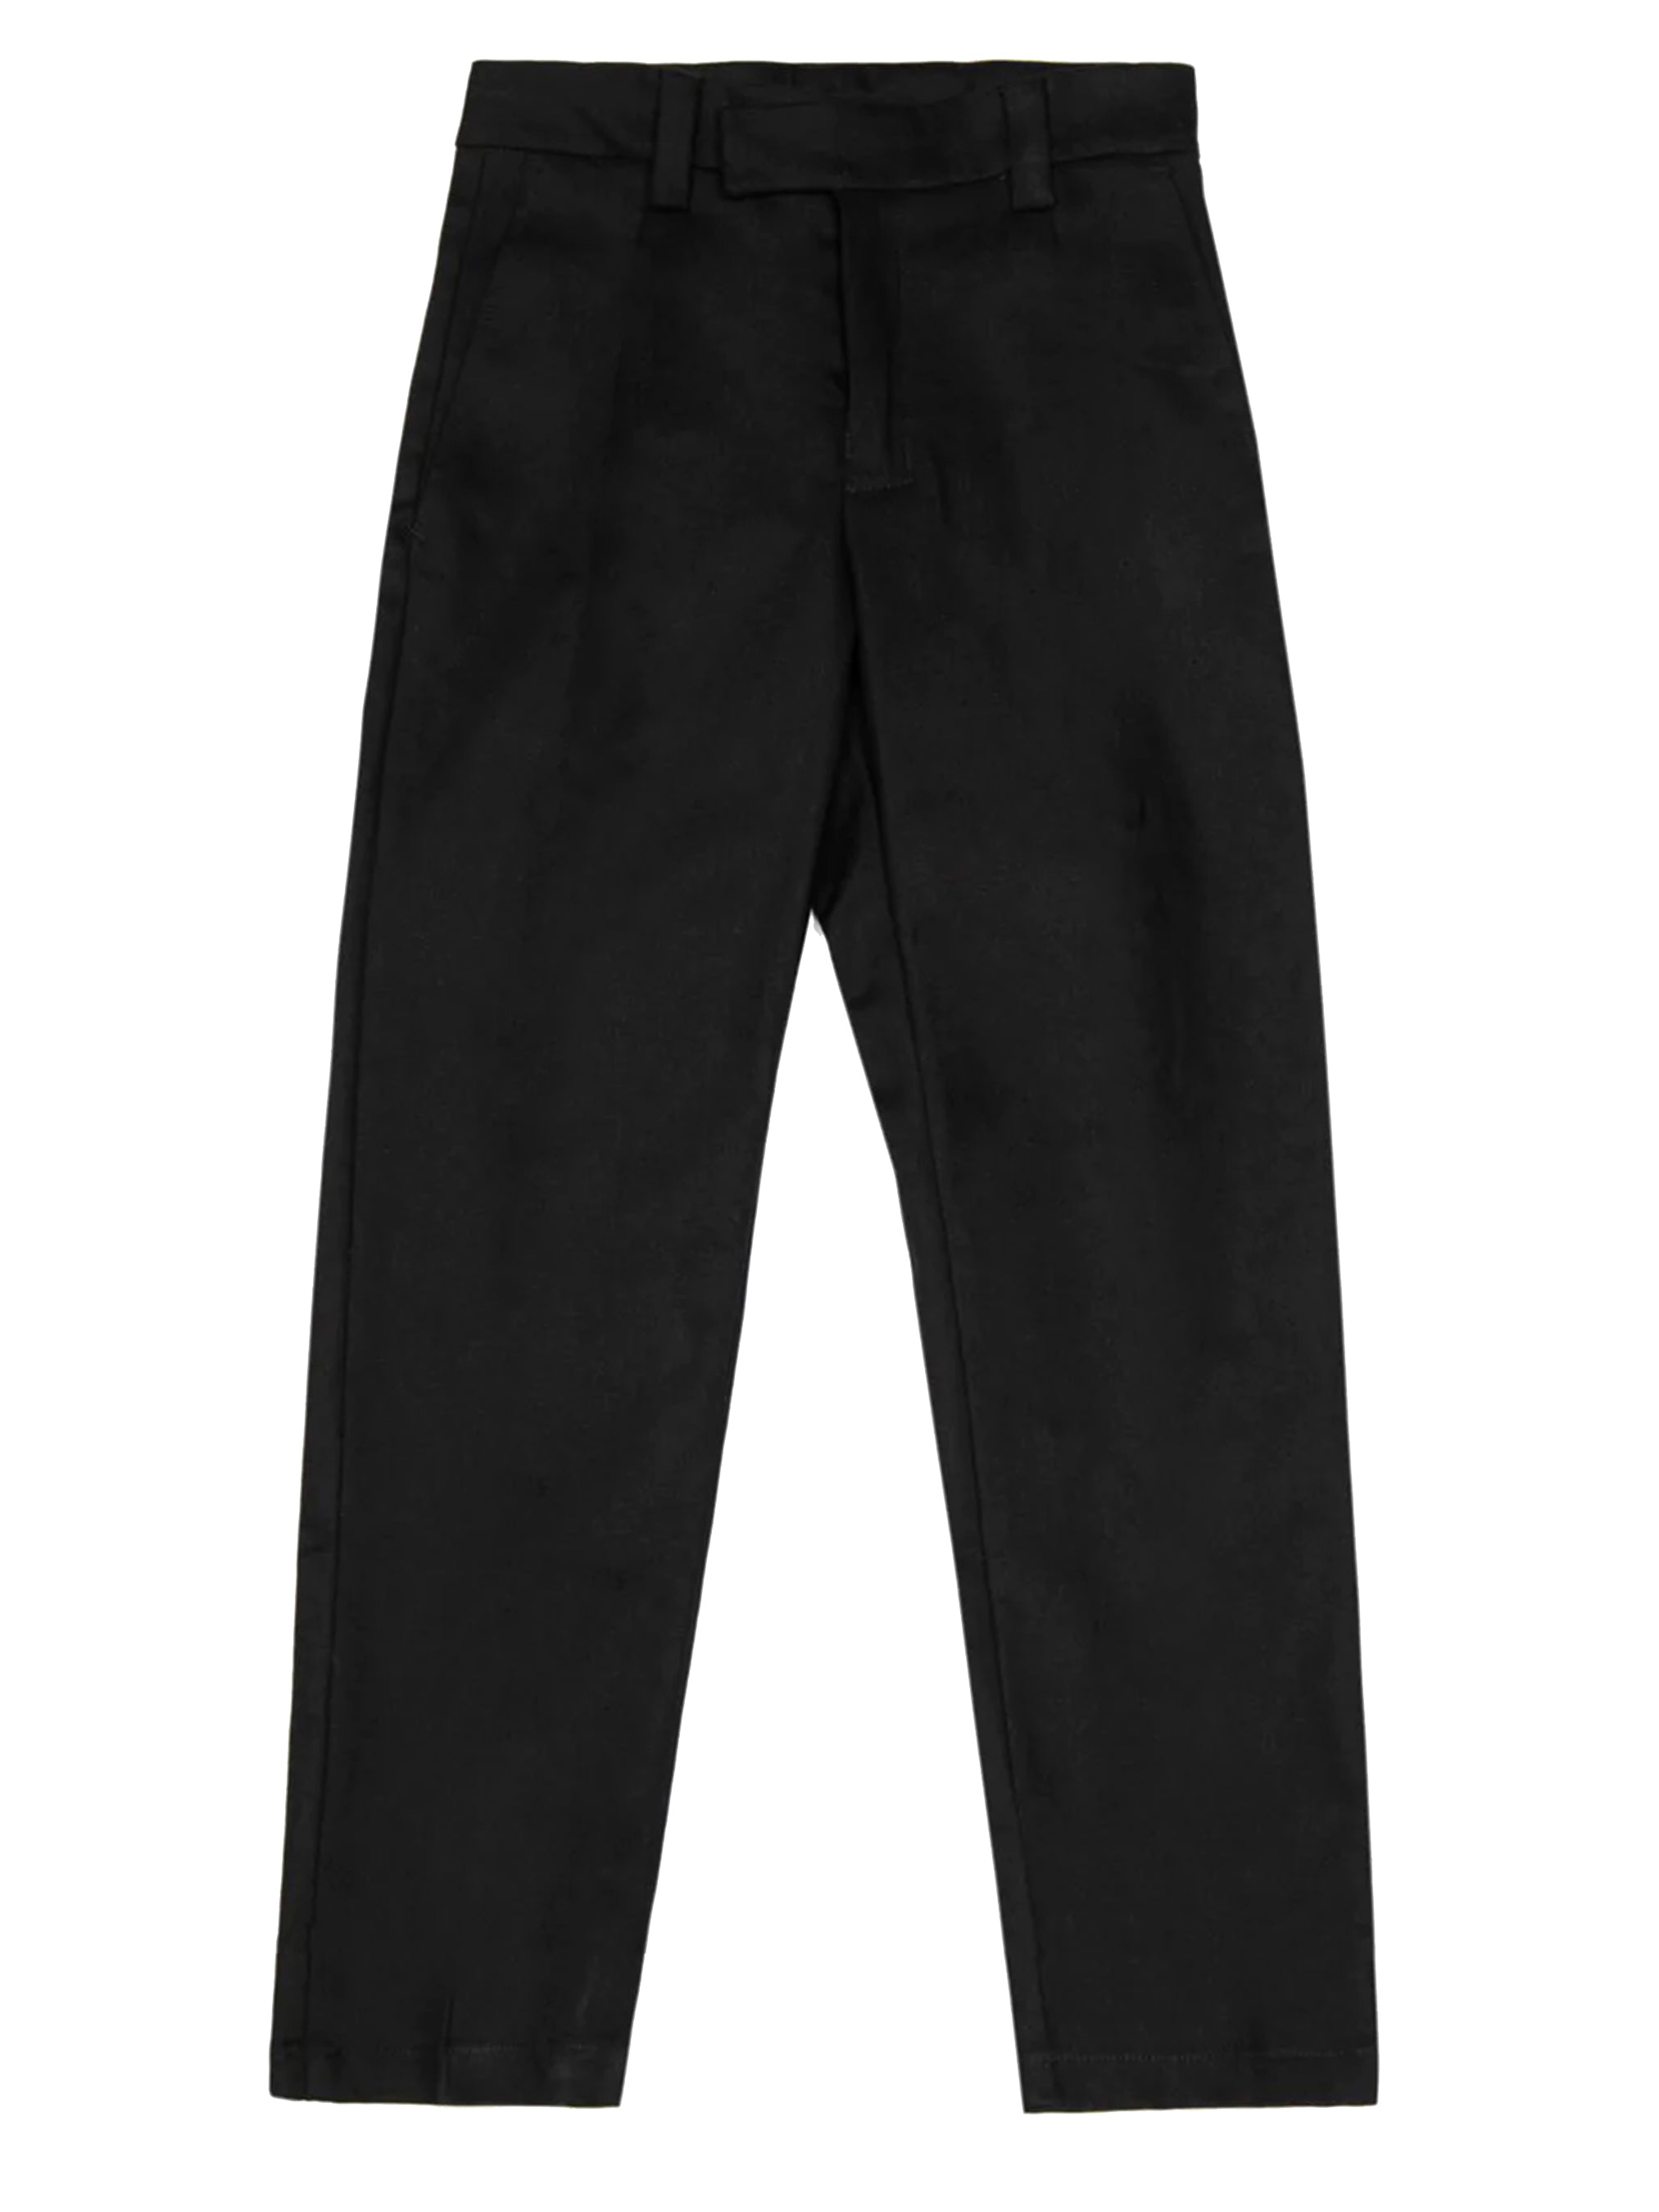 Relaxed Fit Twill trousers - Black - Men | H&M IN